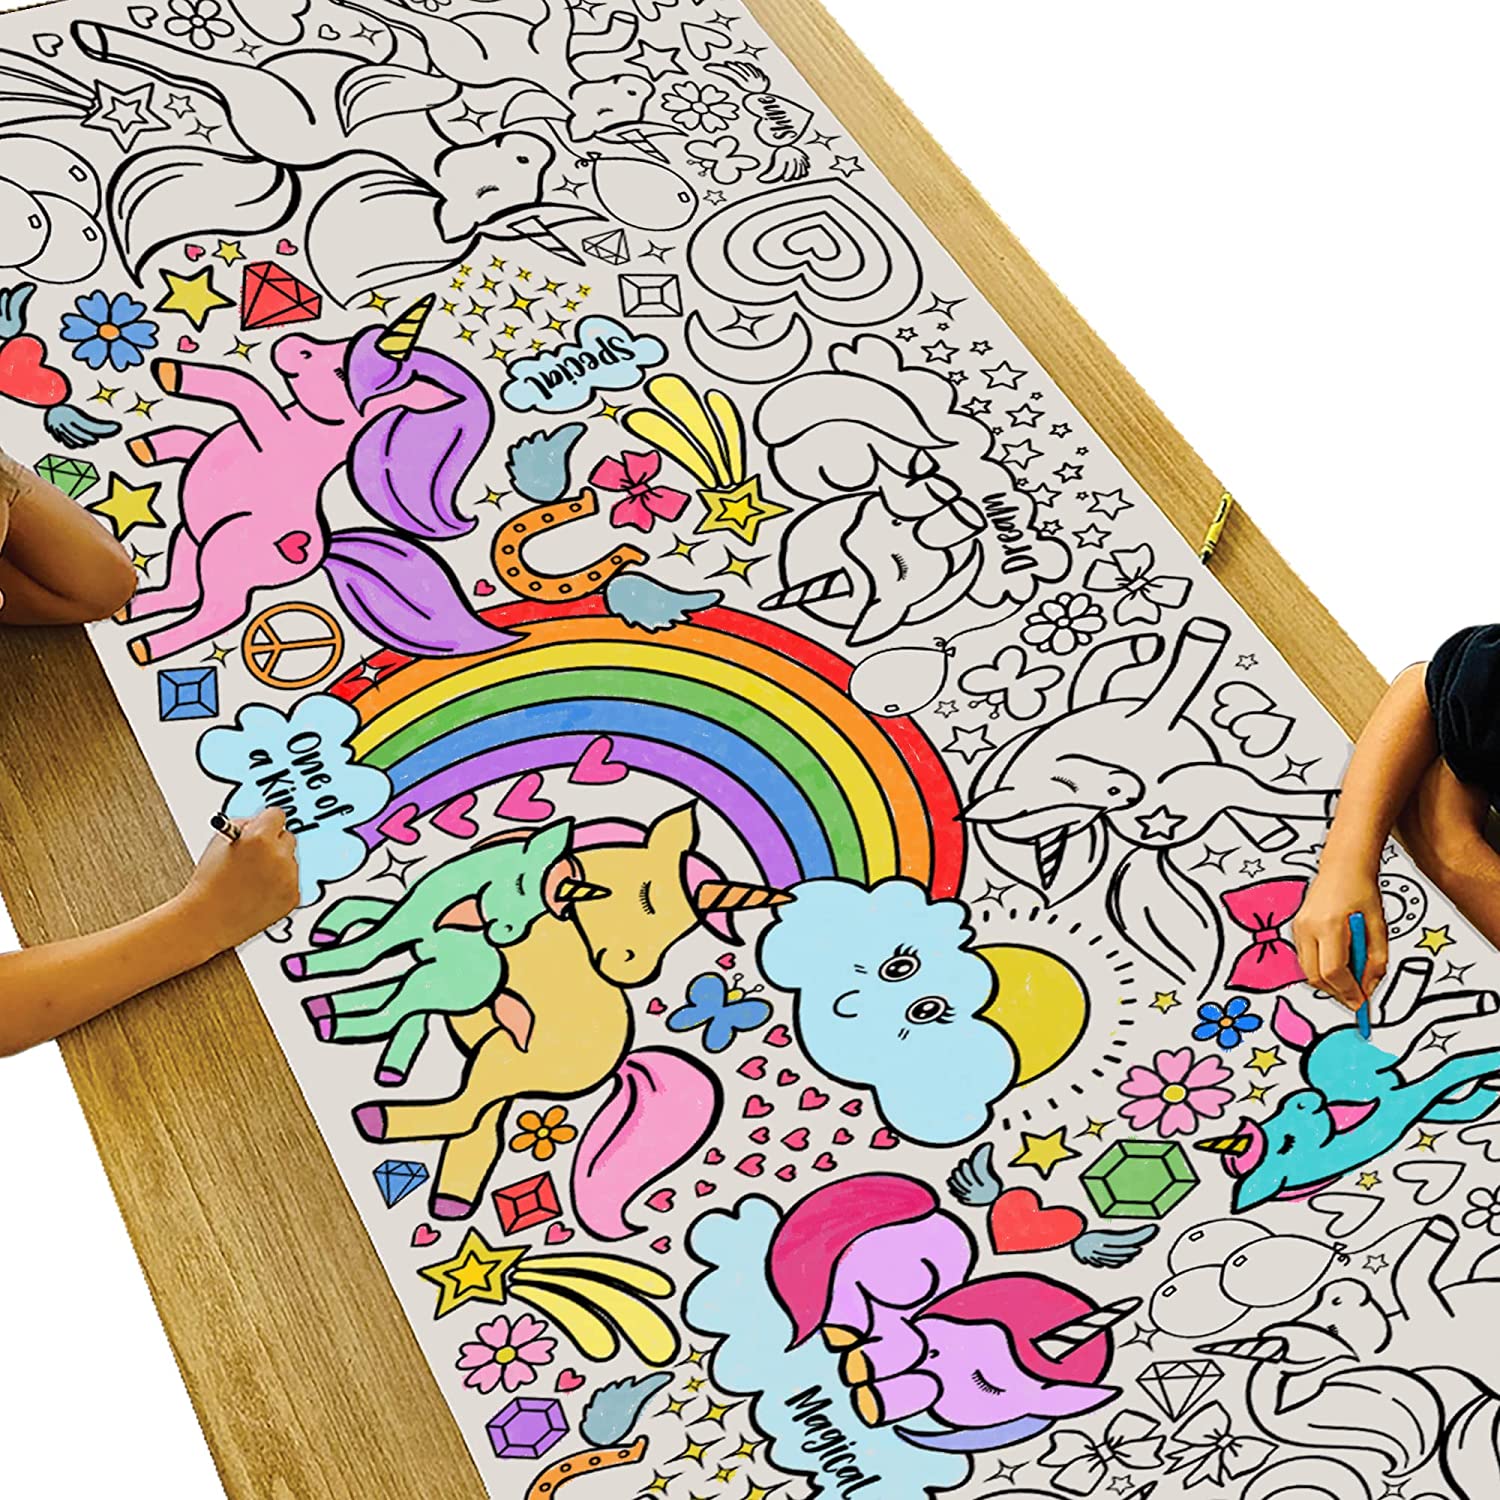 Giant Coloring Posters for Kids, Toddlers, Teens, and Adults. Big Coloring  Posters of Unicorns, Mandalas, Dragons, Fantasy, Super-Detailed Designs and  More.